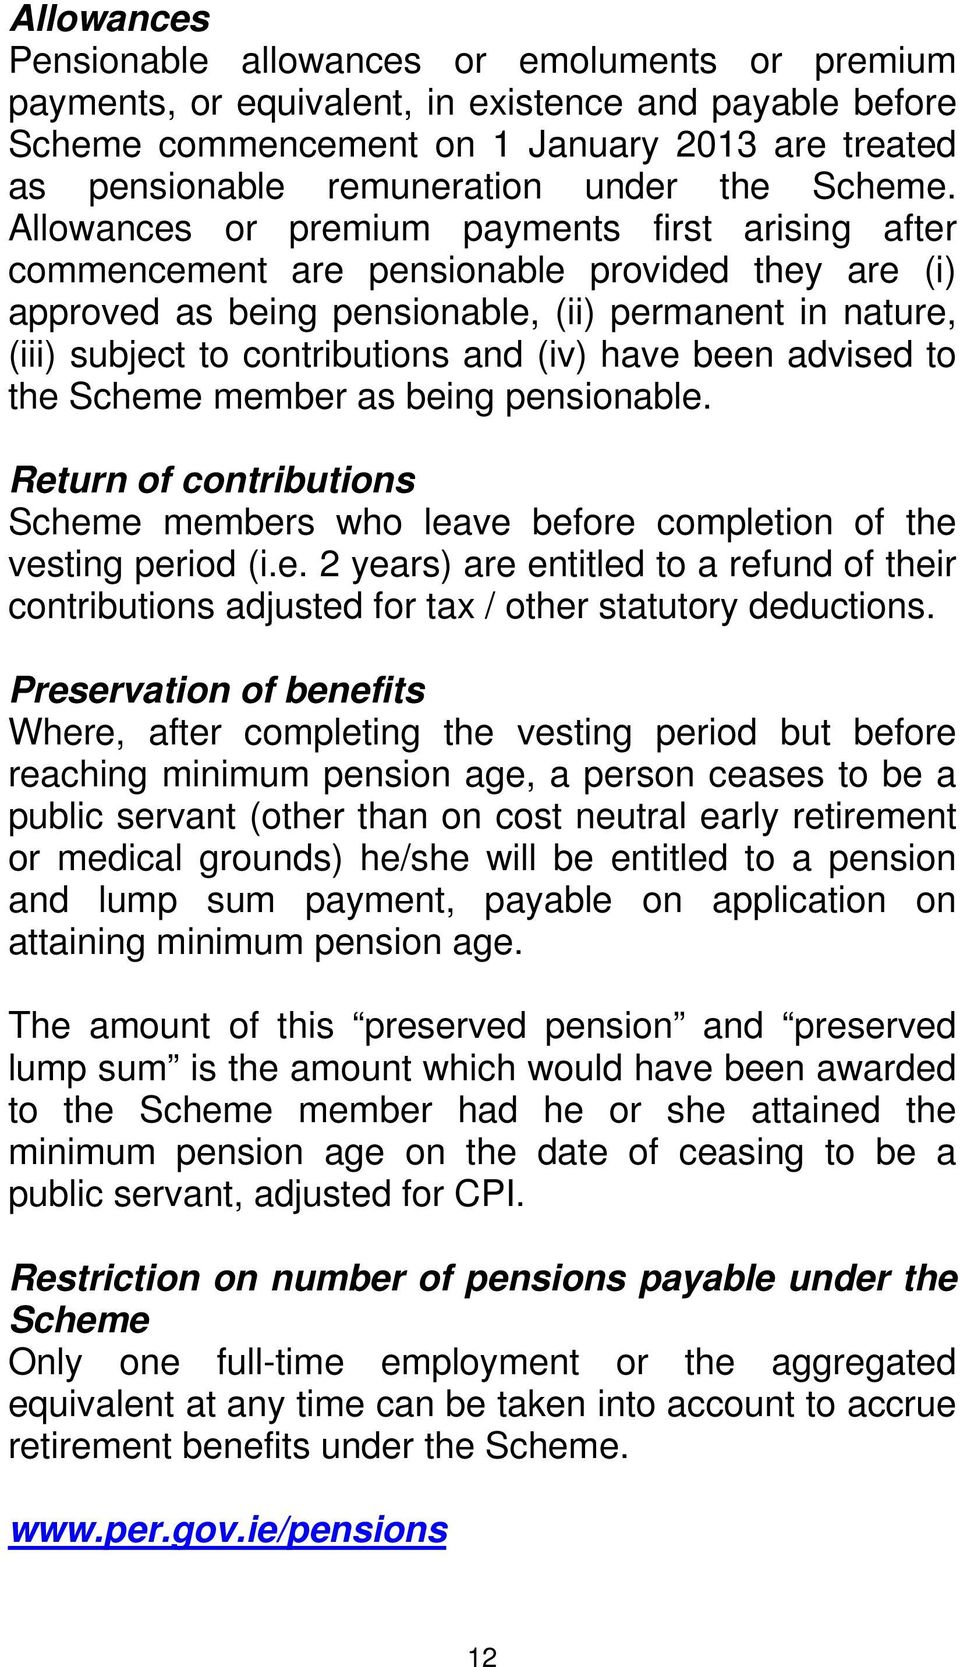 advised t the Scheme member as being pensinable. Return f cntributins Scheme members wh leave befre cmpletin f the vesting perid (i.e. 2 years) are entitled t a refund f their cntributins adjusted fr tax / ther statutry deductins.